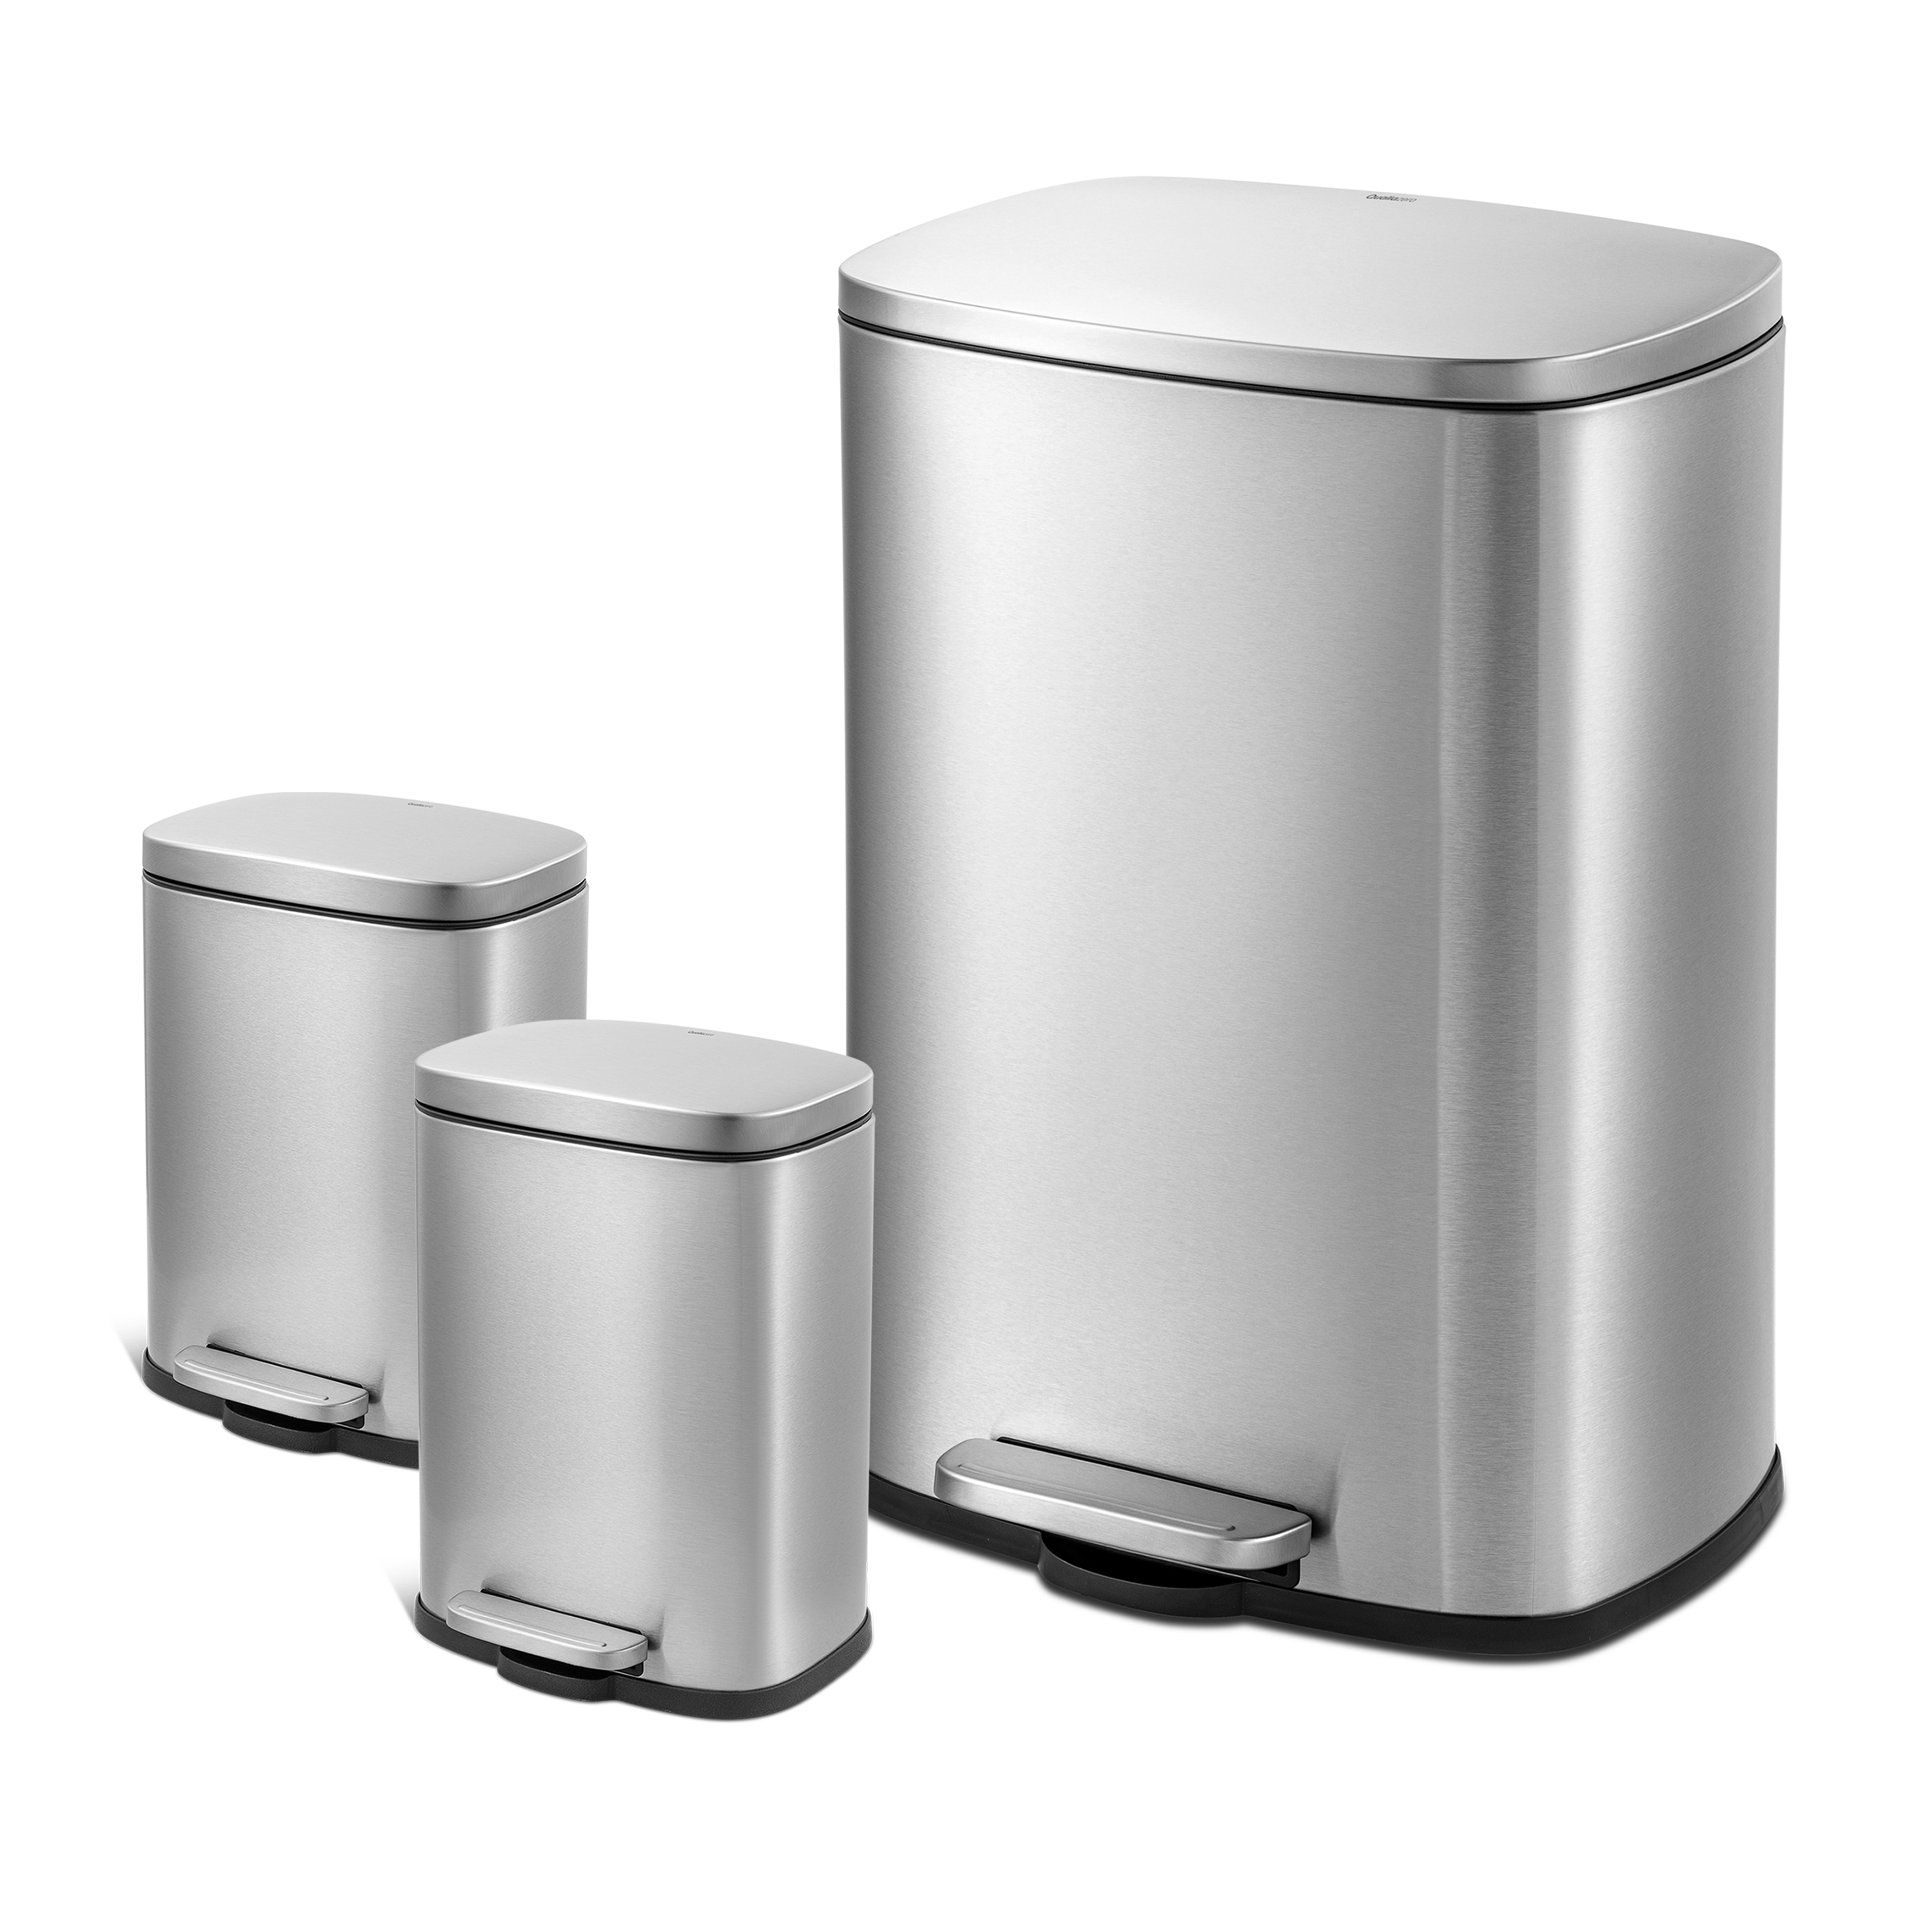 Qualiazero Rectangular Step Garbage Can 3 Piece Combo, 13.2 gal , Two 1.3 gal, Stainless Steel - image 1 of 11